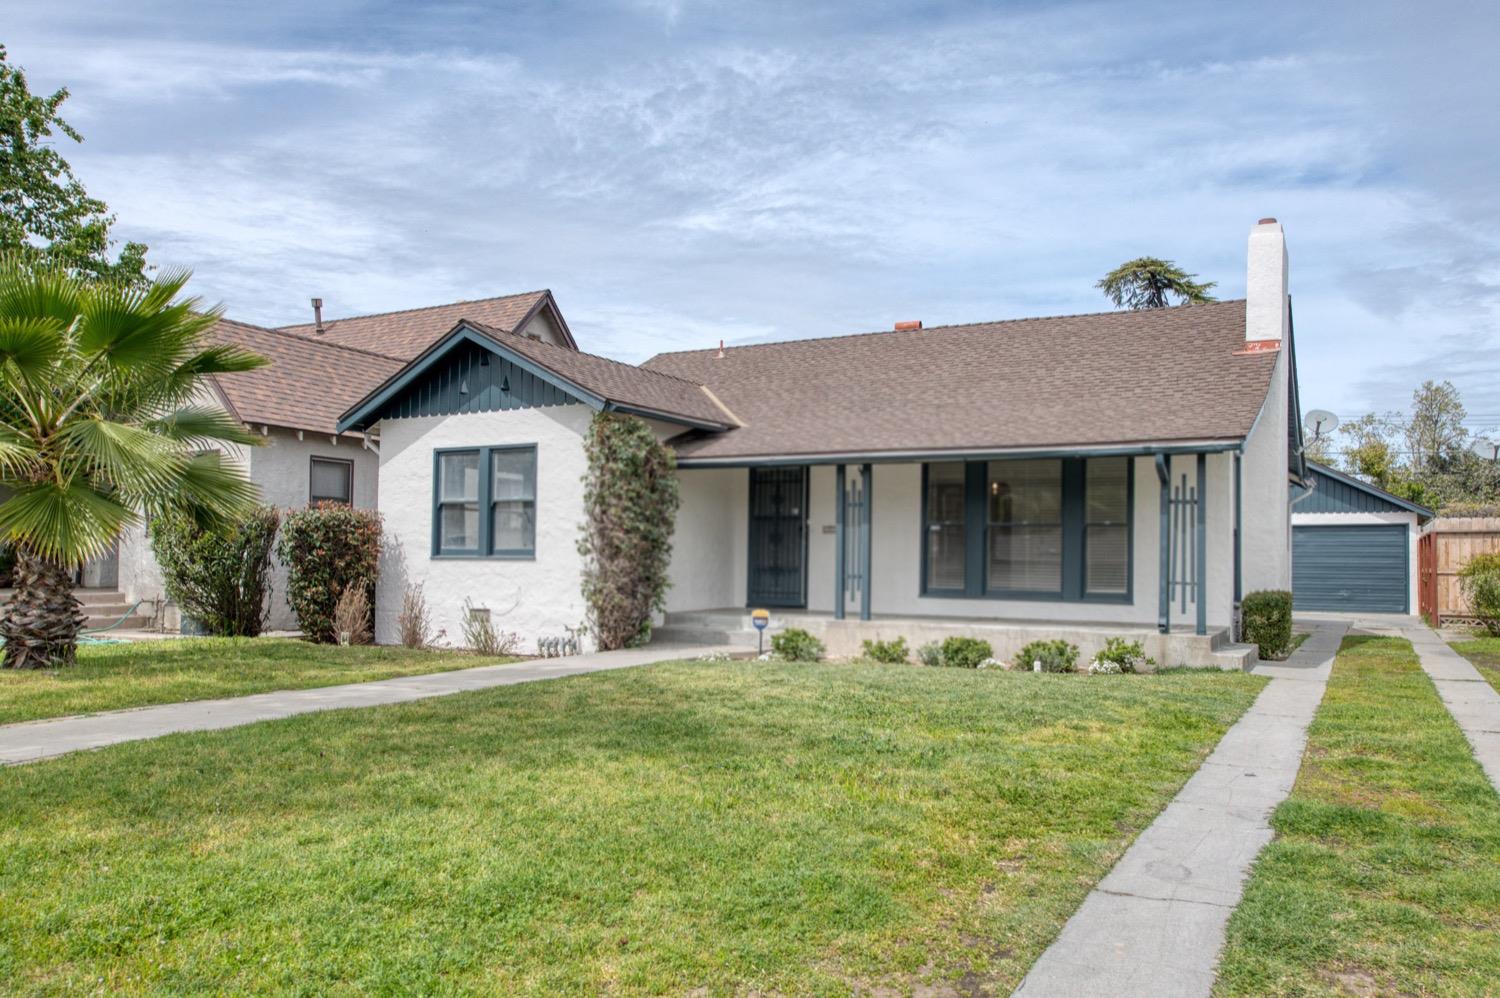 Photo of 1115 E Yale Ave in Fresno, CA